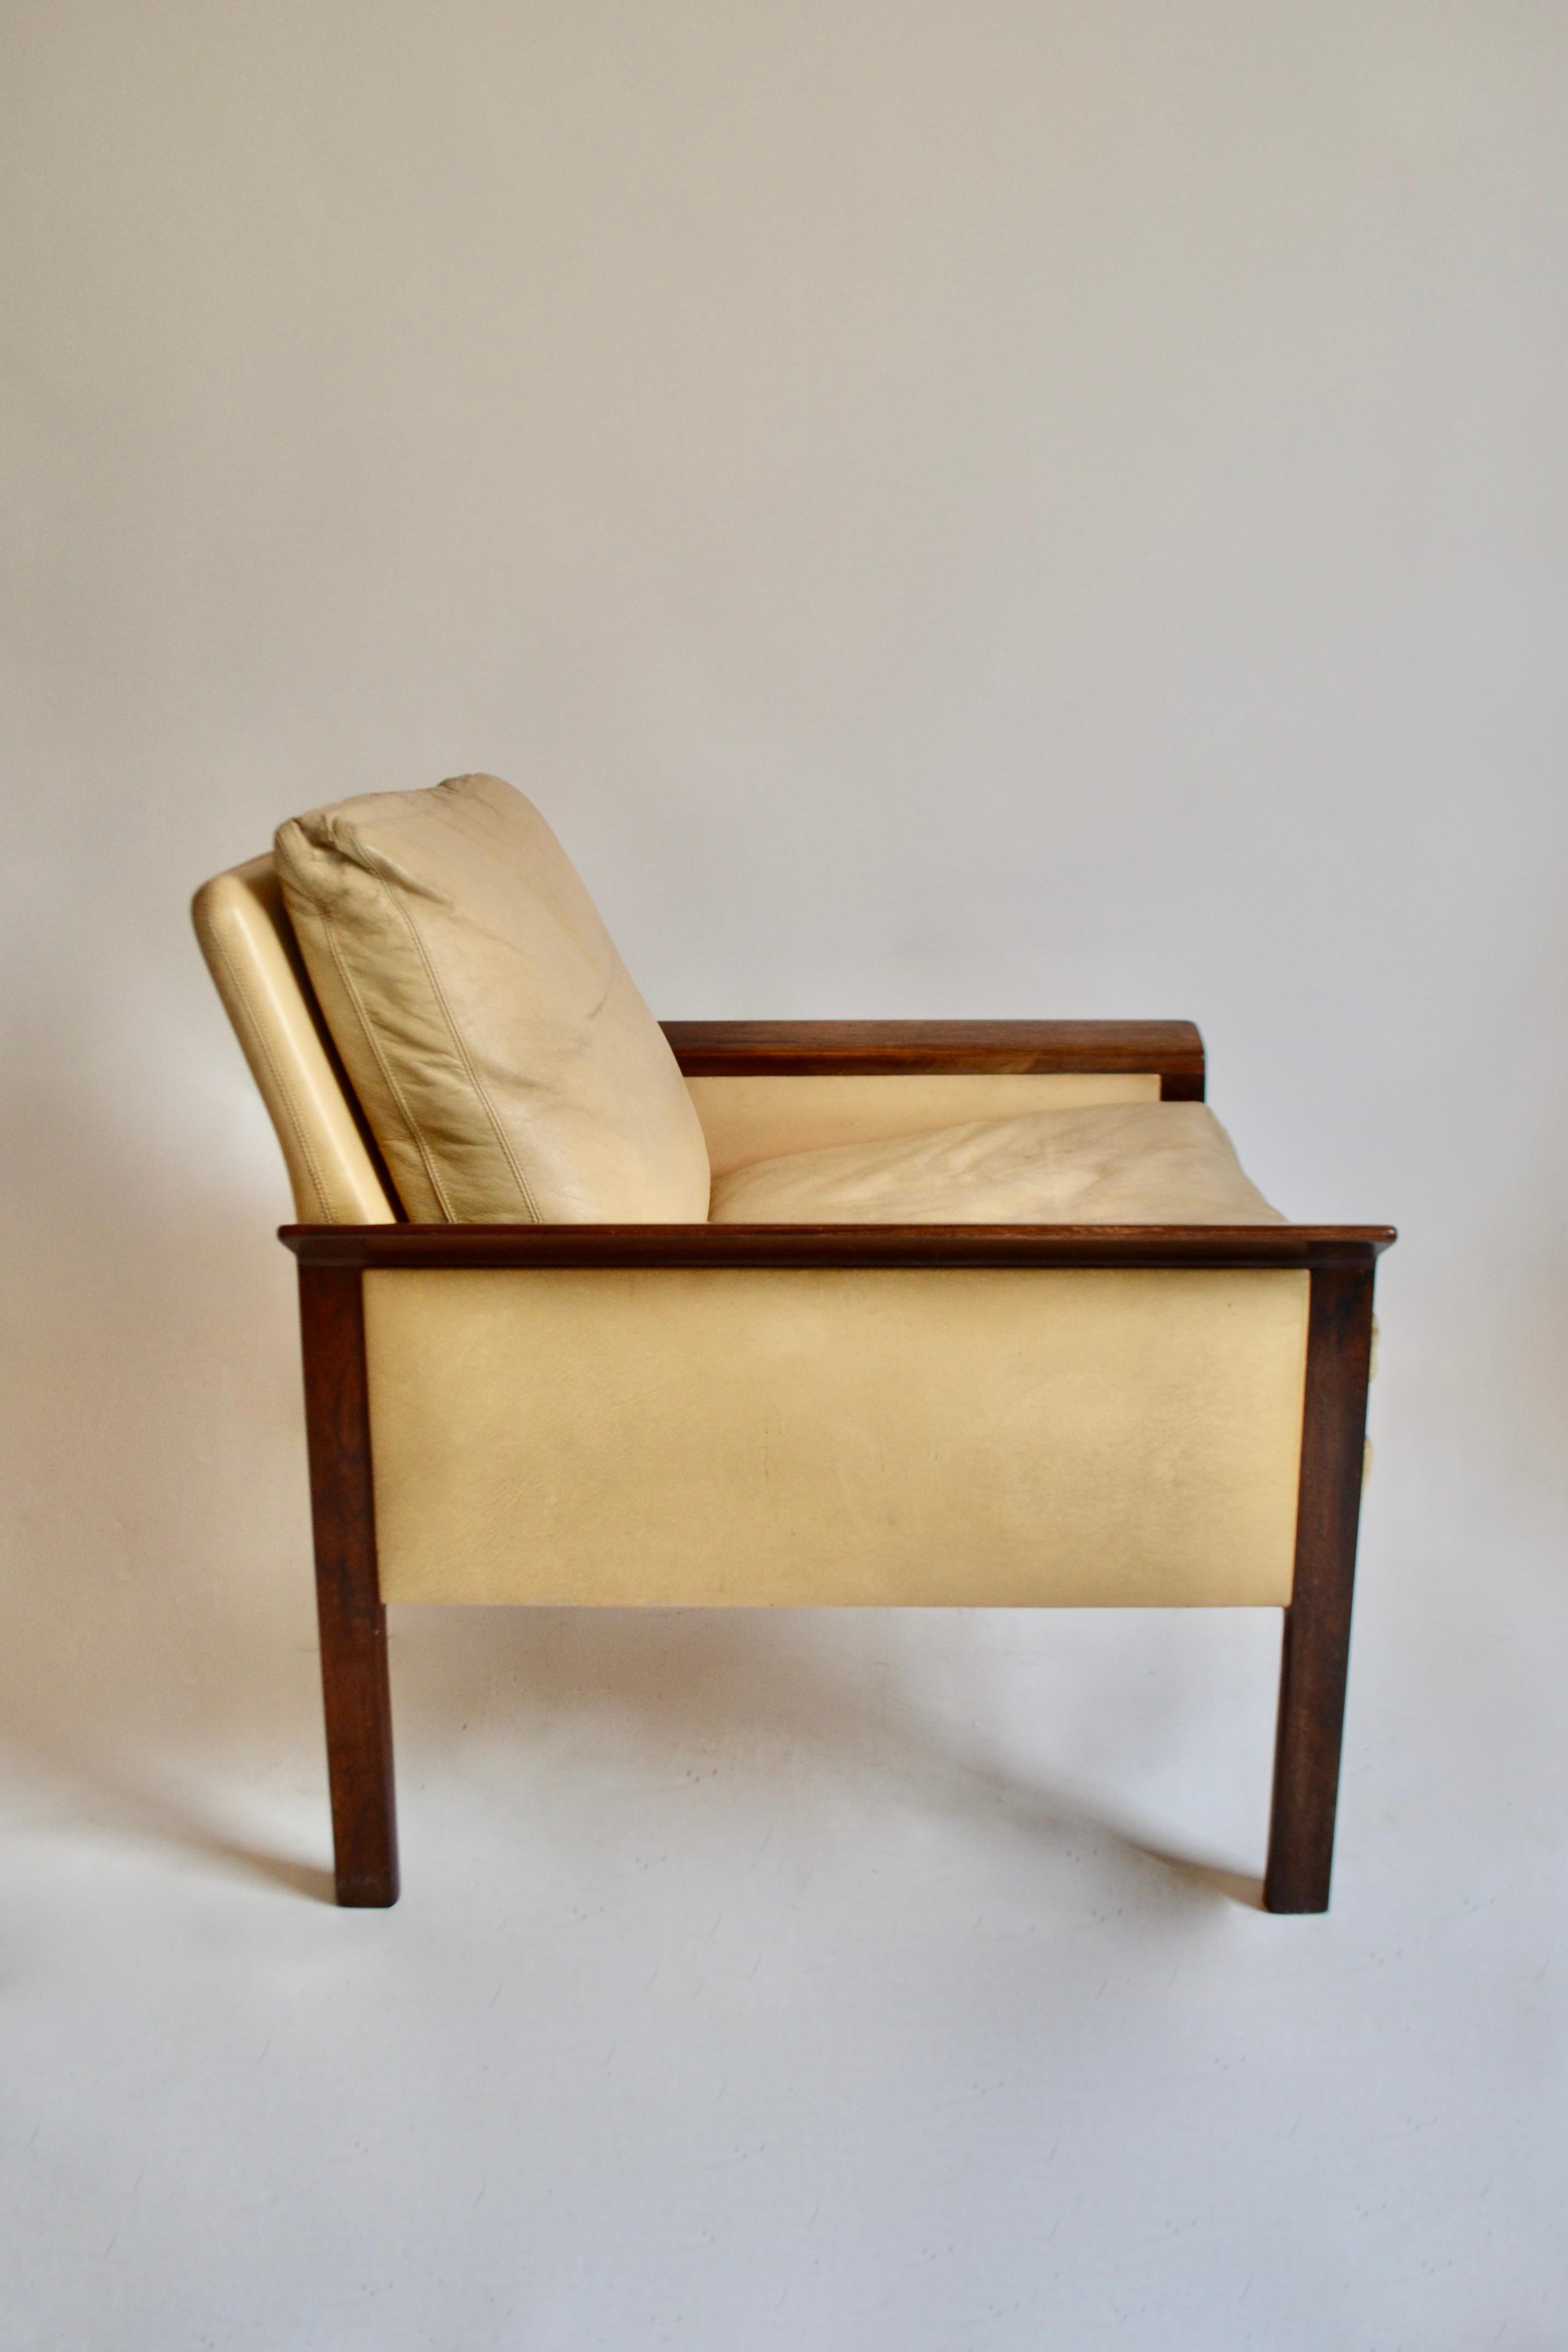 Scandinavian Modern Cream Leather and Walnut Lounge Chair by Hans Olsen for C S Møbler, 1960s